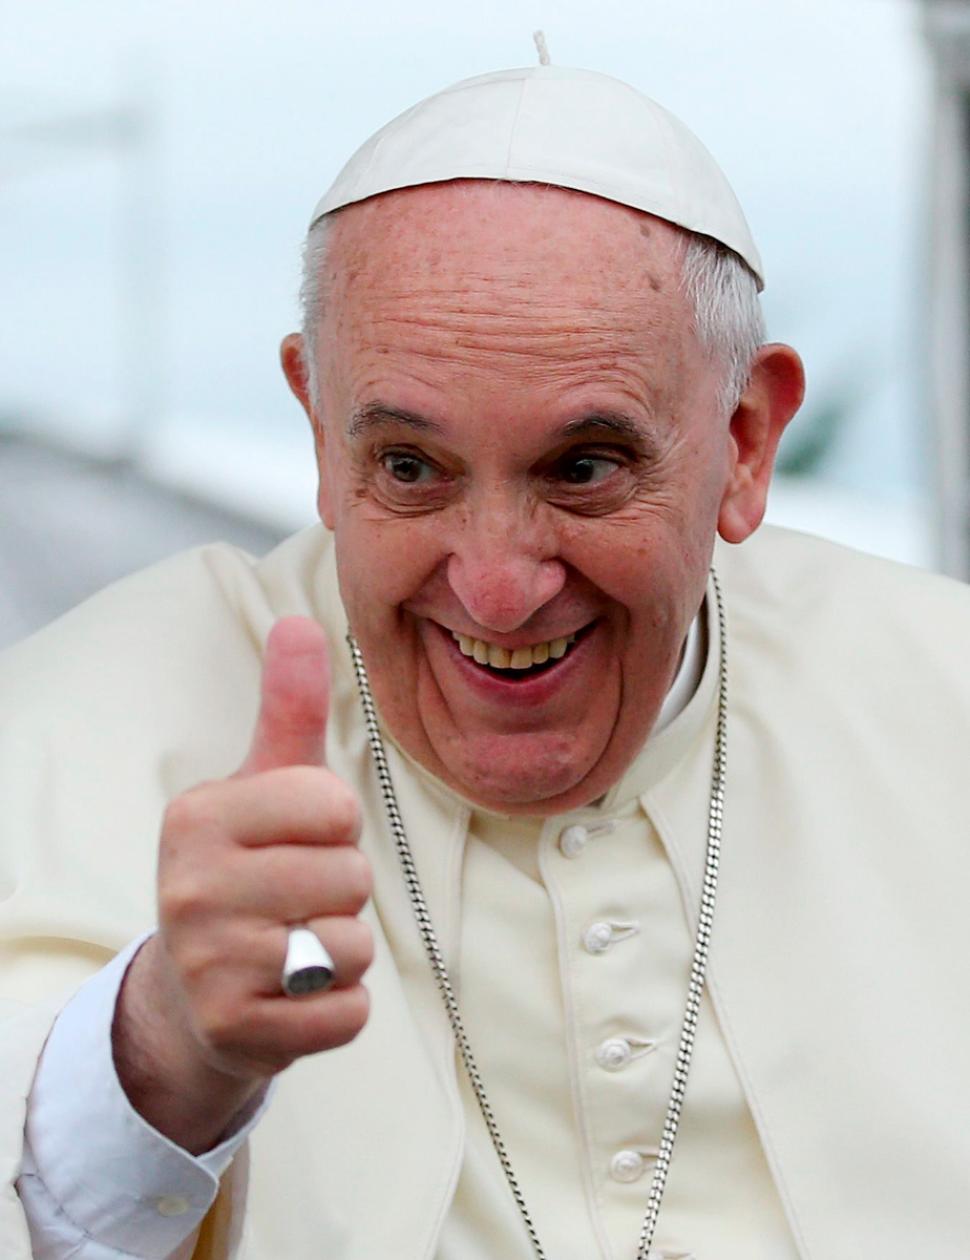 In affront to God, Pope Francis condemns antivaxxers, says NOT taking the covid vaccine is an act of suicide... refuses to condemn transhumanism mRNA vaccine tech  